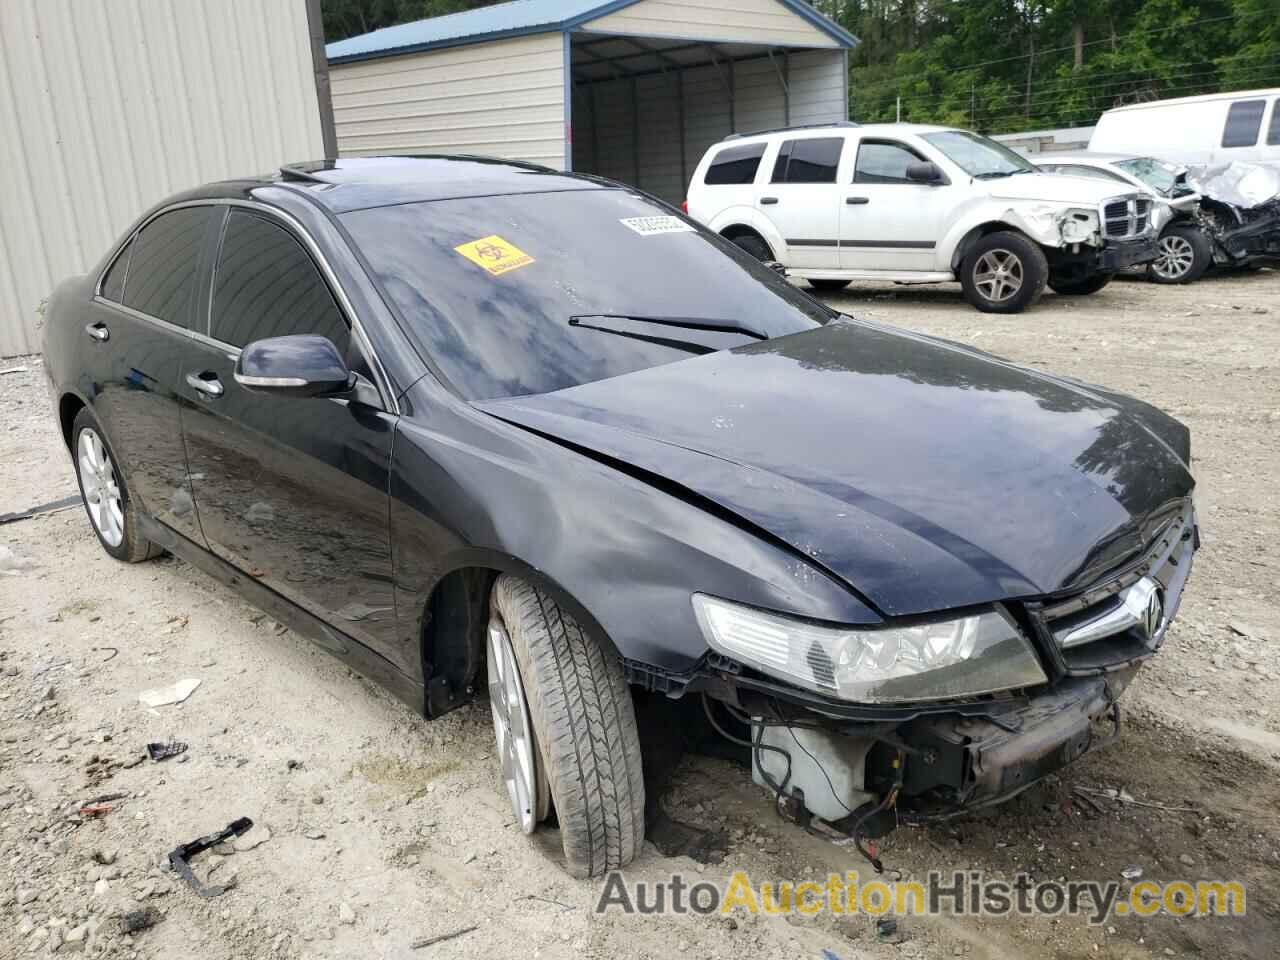 2006 ACURA TLX, JH4CL96956C028526